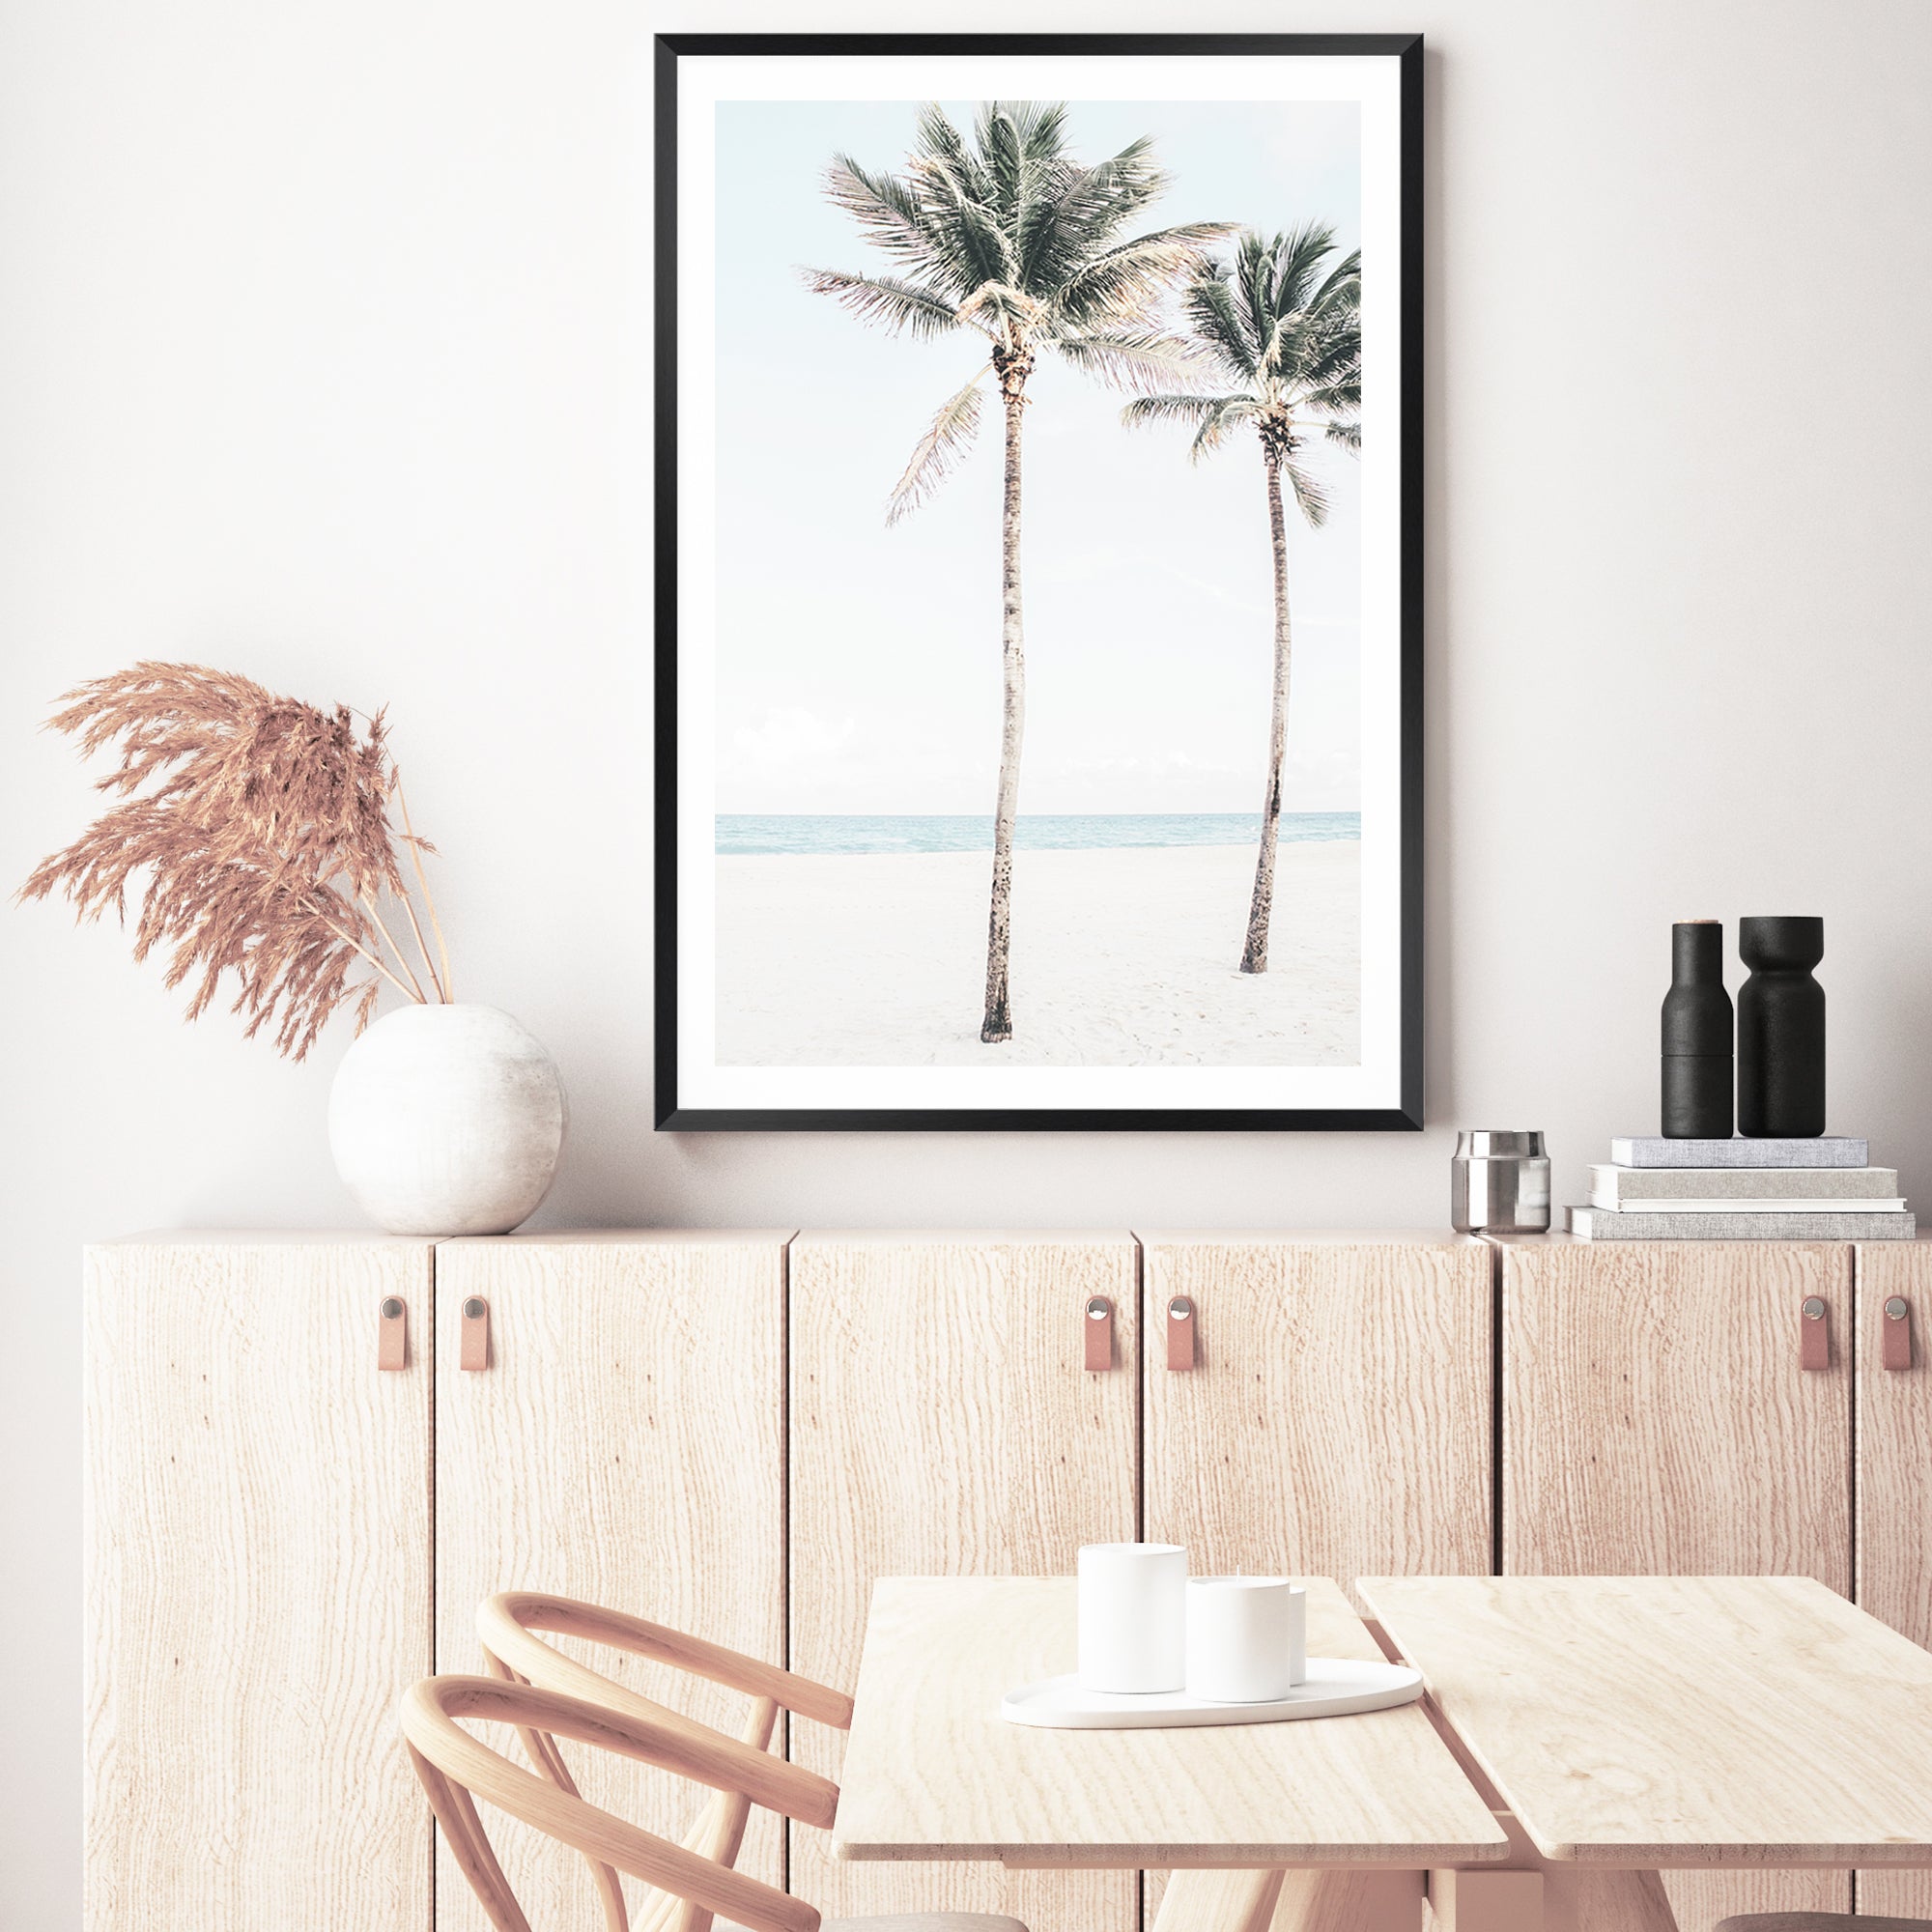 A framed or unframed stretched canvas of a coastal artwork of blue skies, two palm trees and the beach